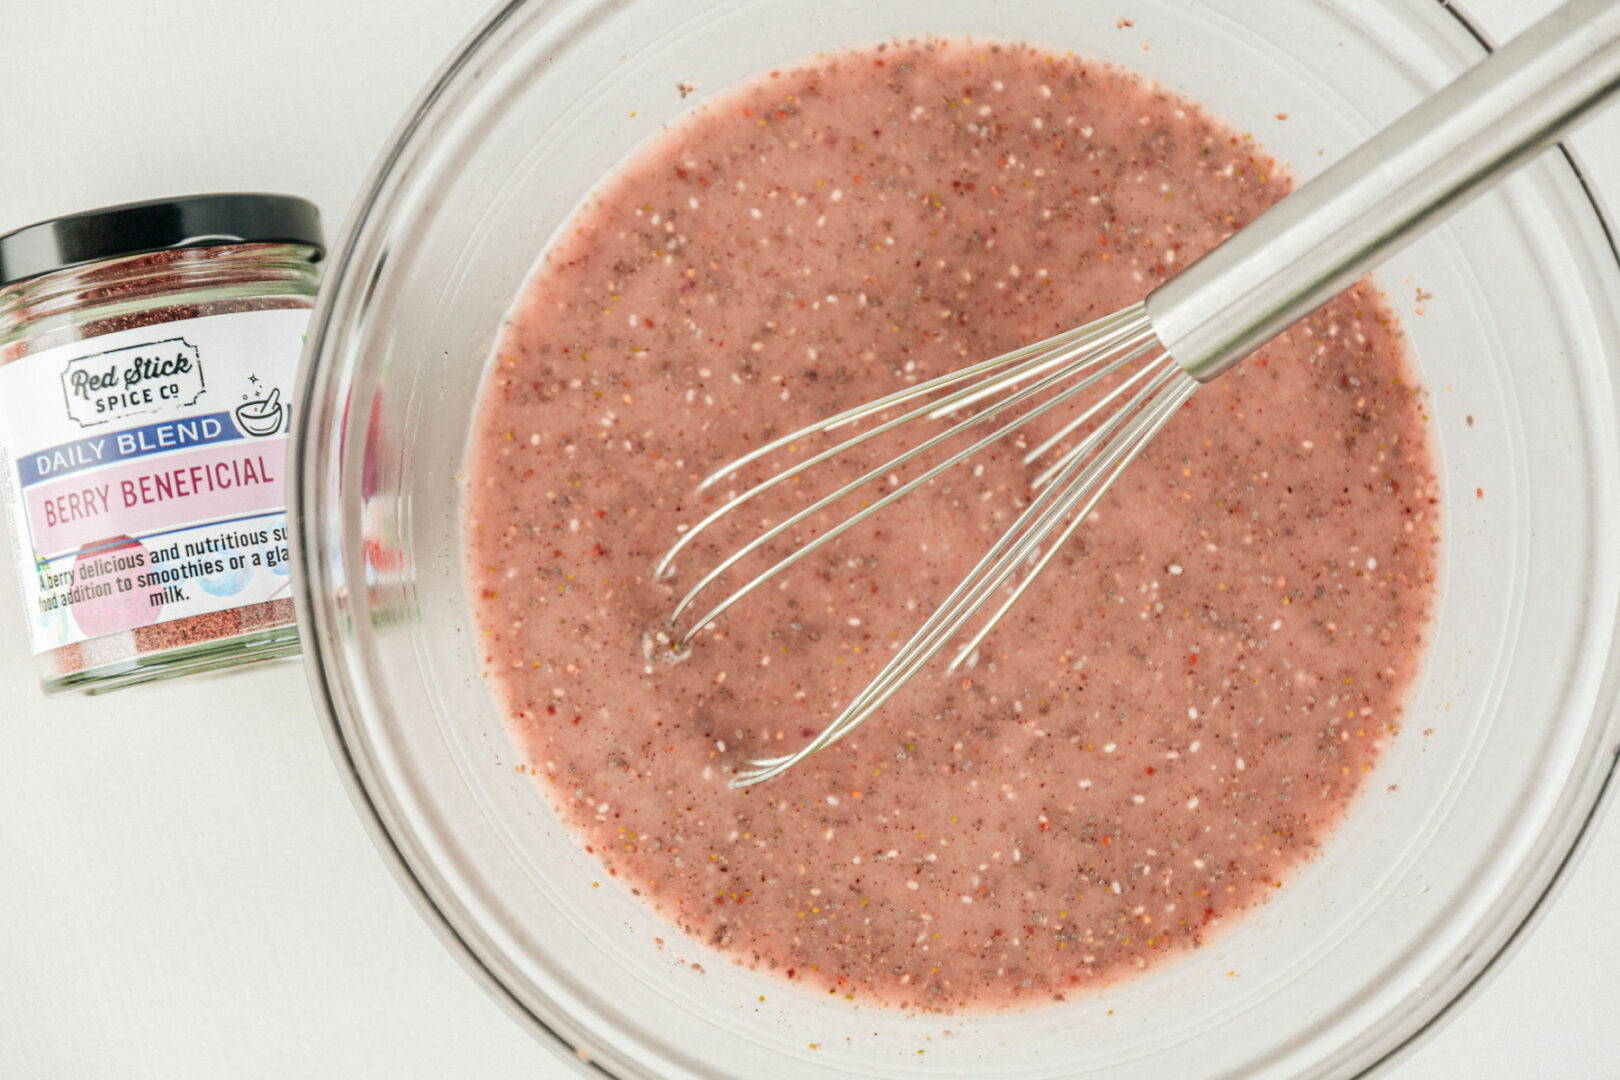 BERRY BENEFICIAL CHIA SEED PUDDING